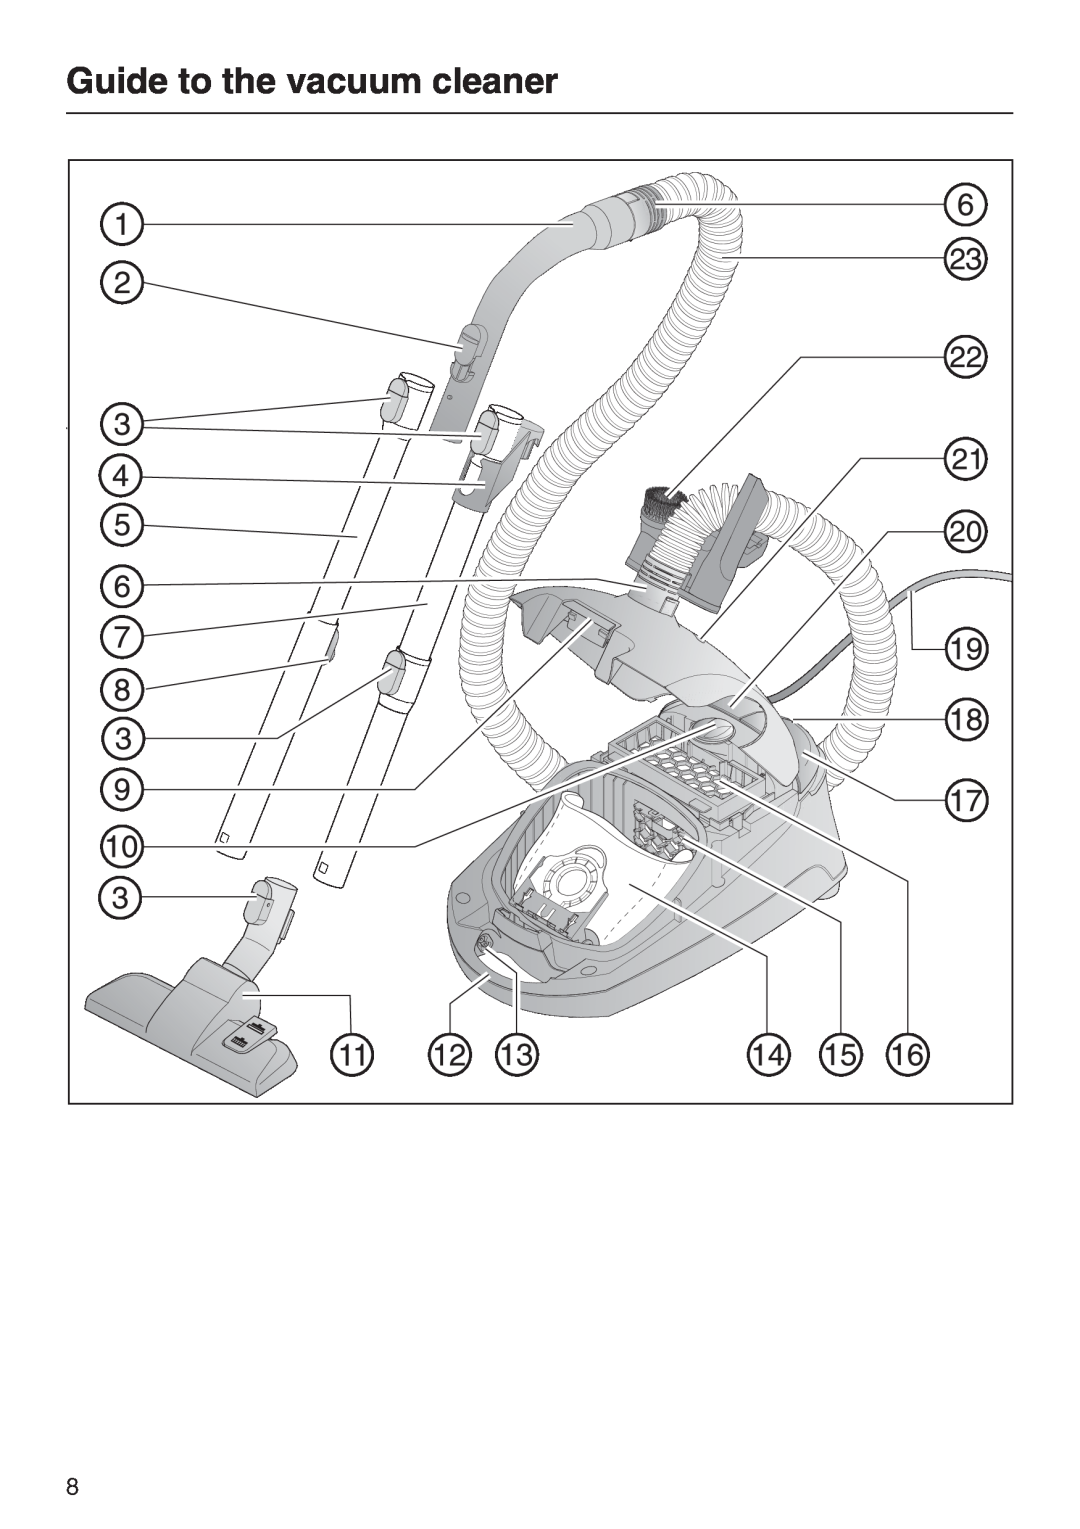 Miele S 2120, S 2000, HS12 manual Guide to the vacuum cleaner 